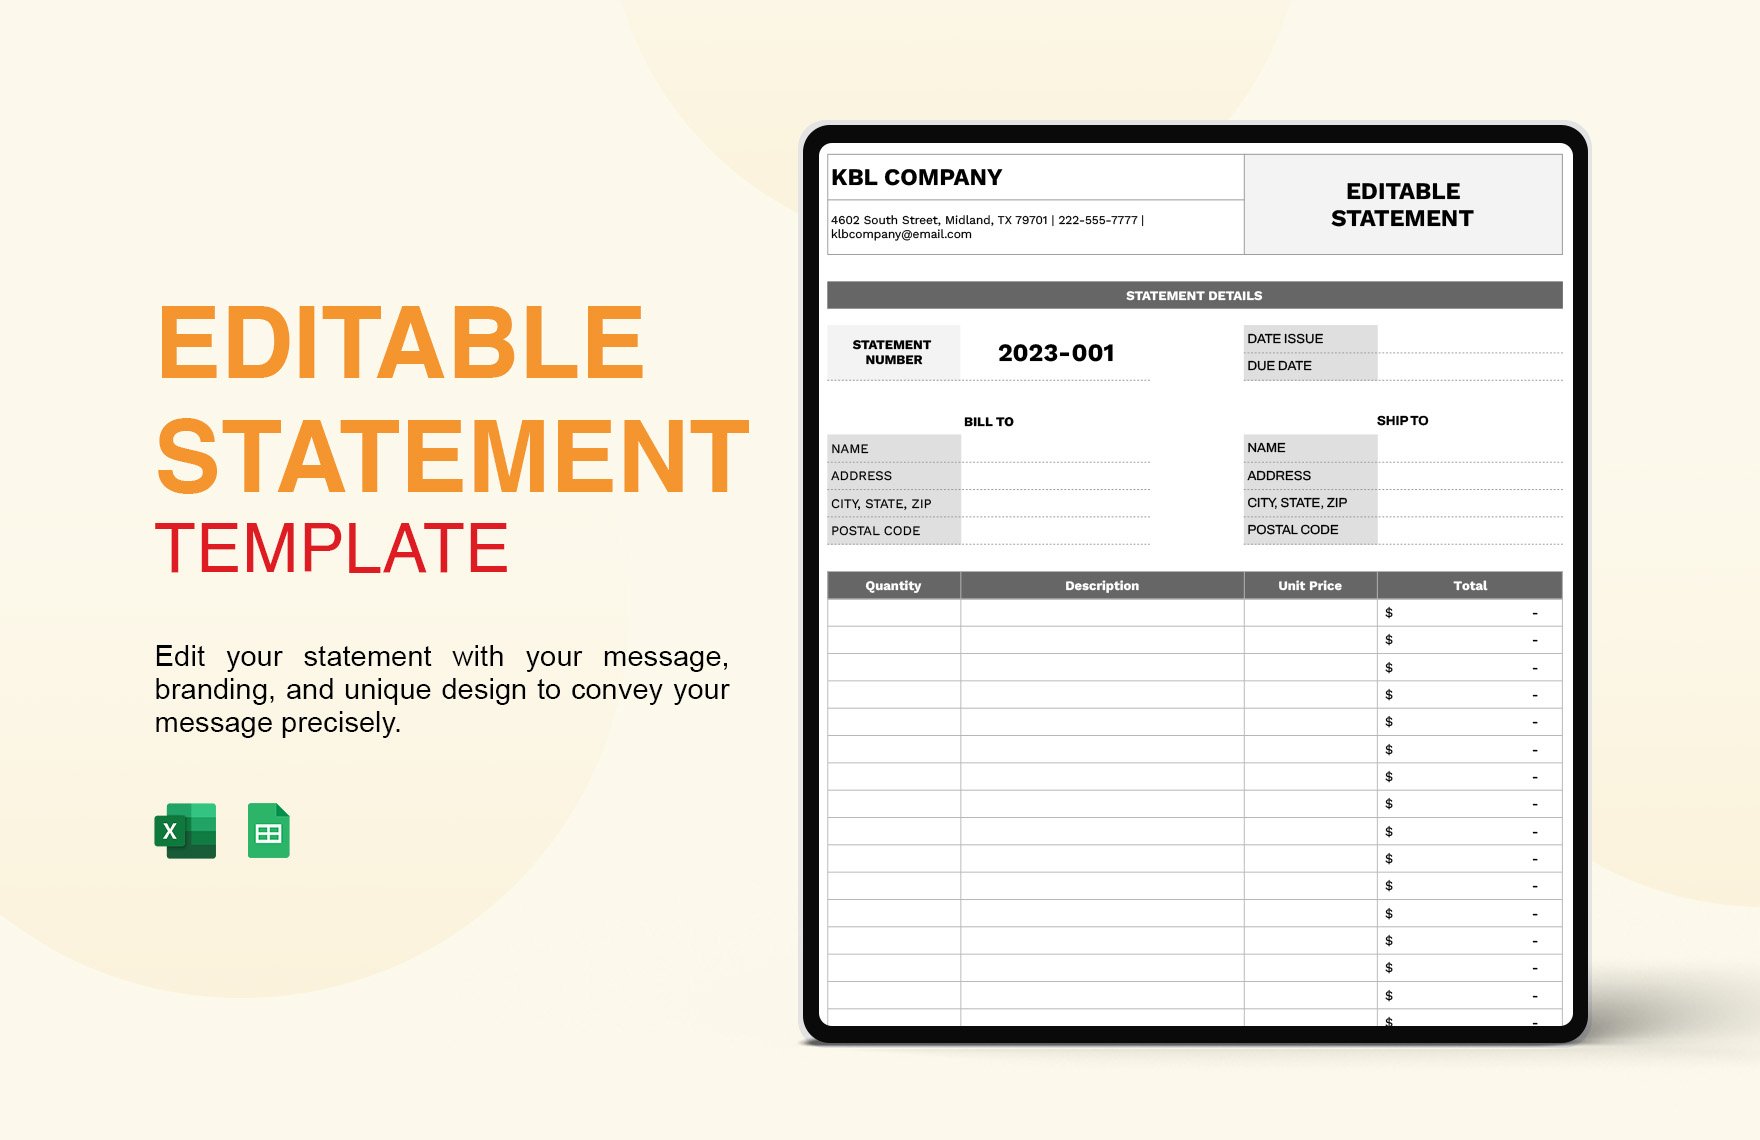 Free Editable Statement Template in Excel, Google Sheets